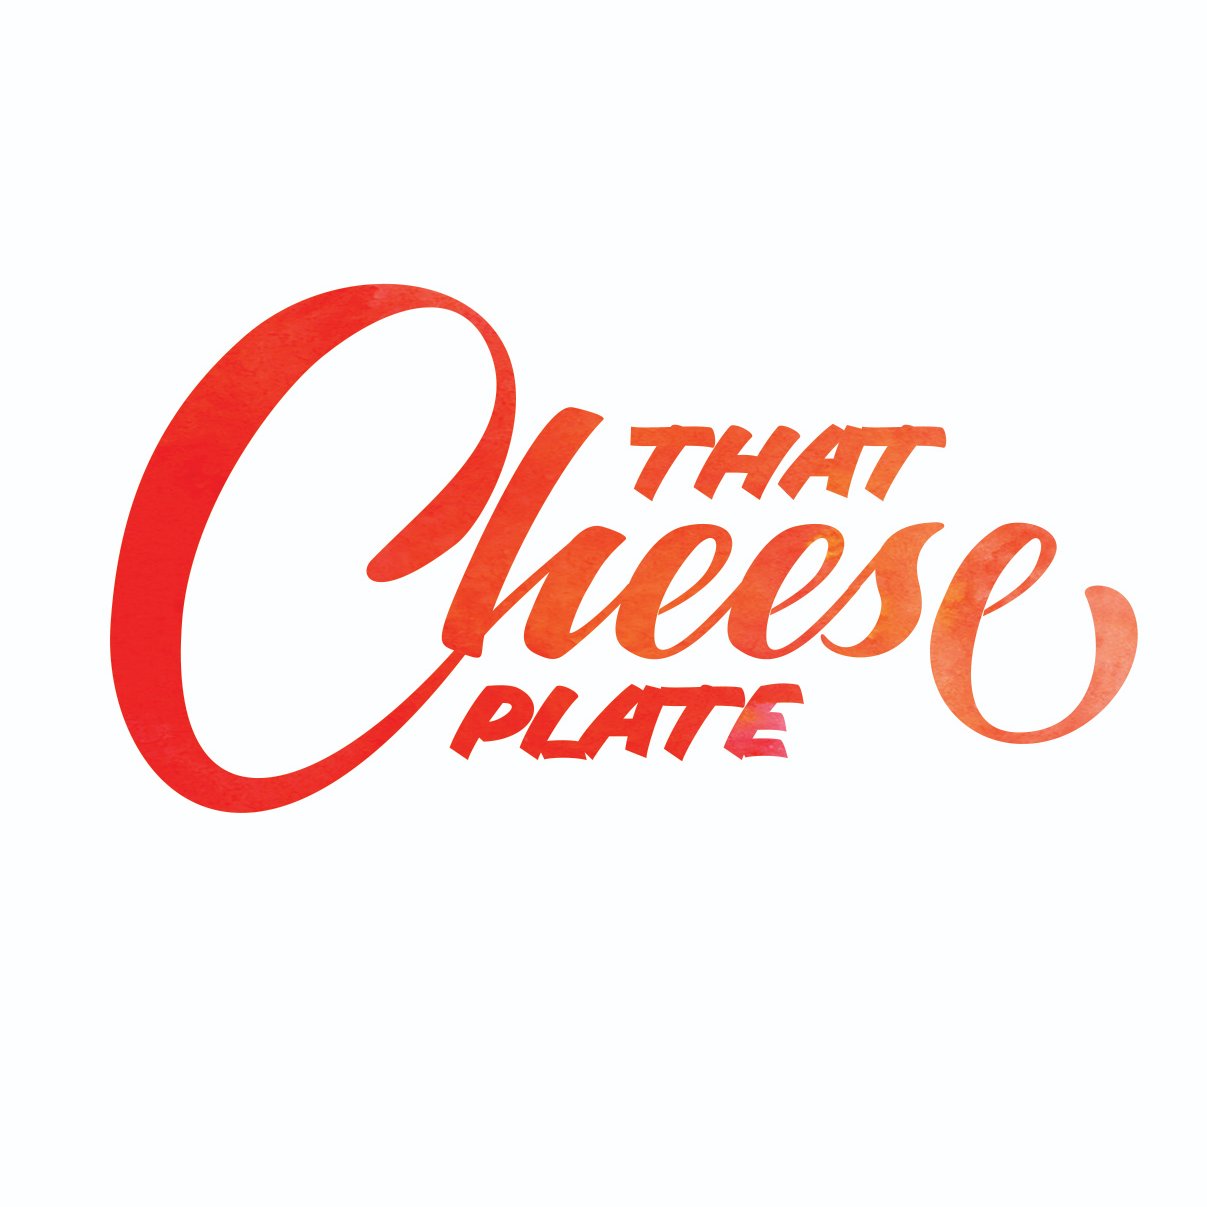 Your Go-To Source for Cheese Plate Inspiration 🧀 Home of the #CheeseByNumbers method. The new book “That Cheese Plate Will Change Your Life” is out now! ↓